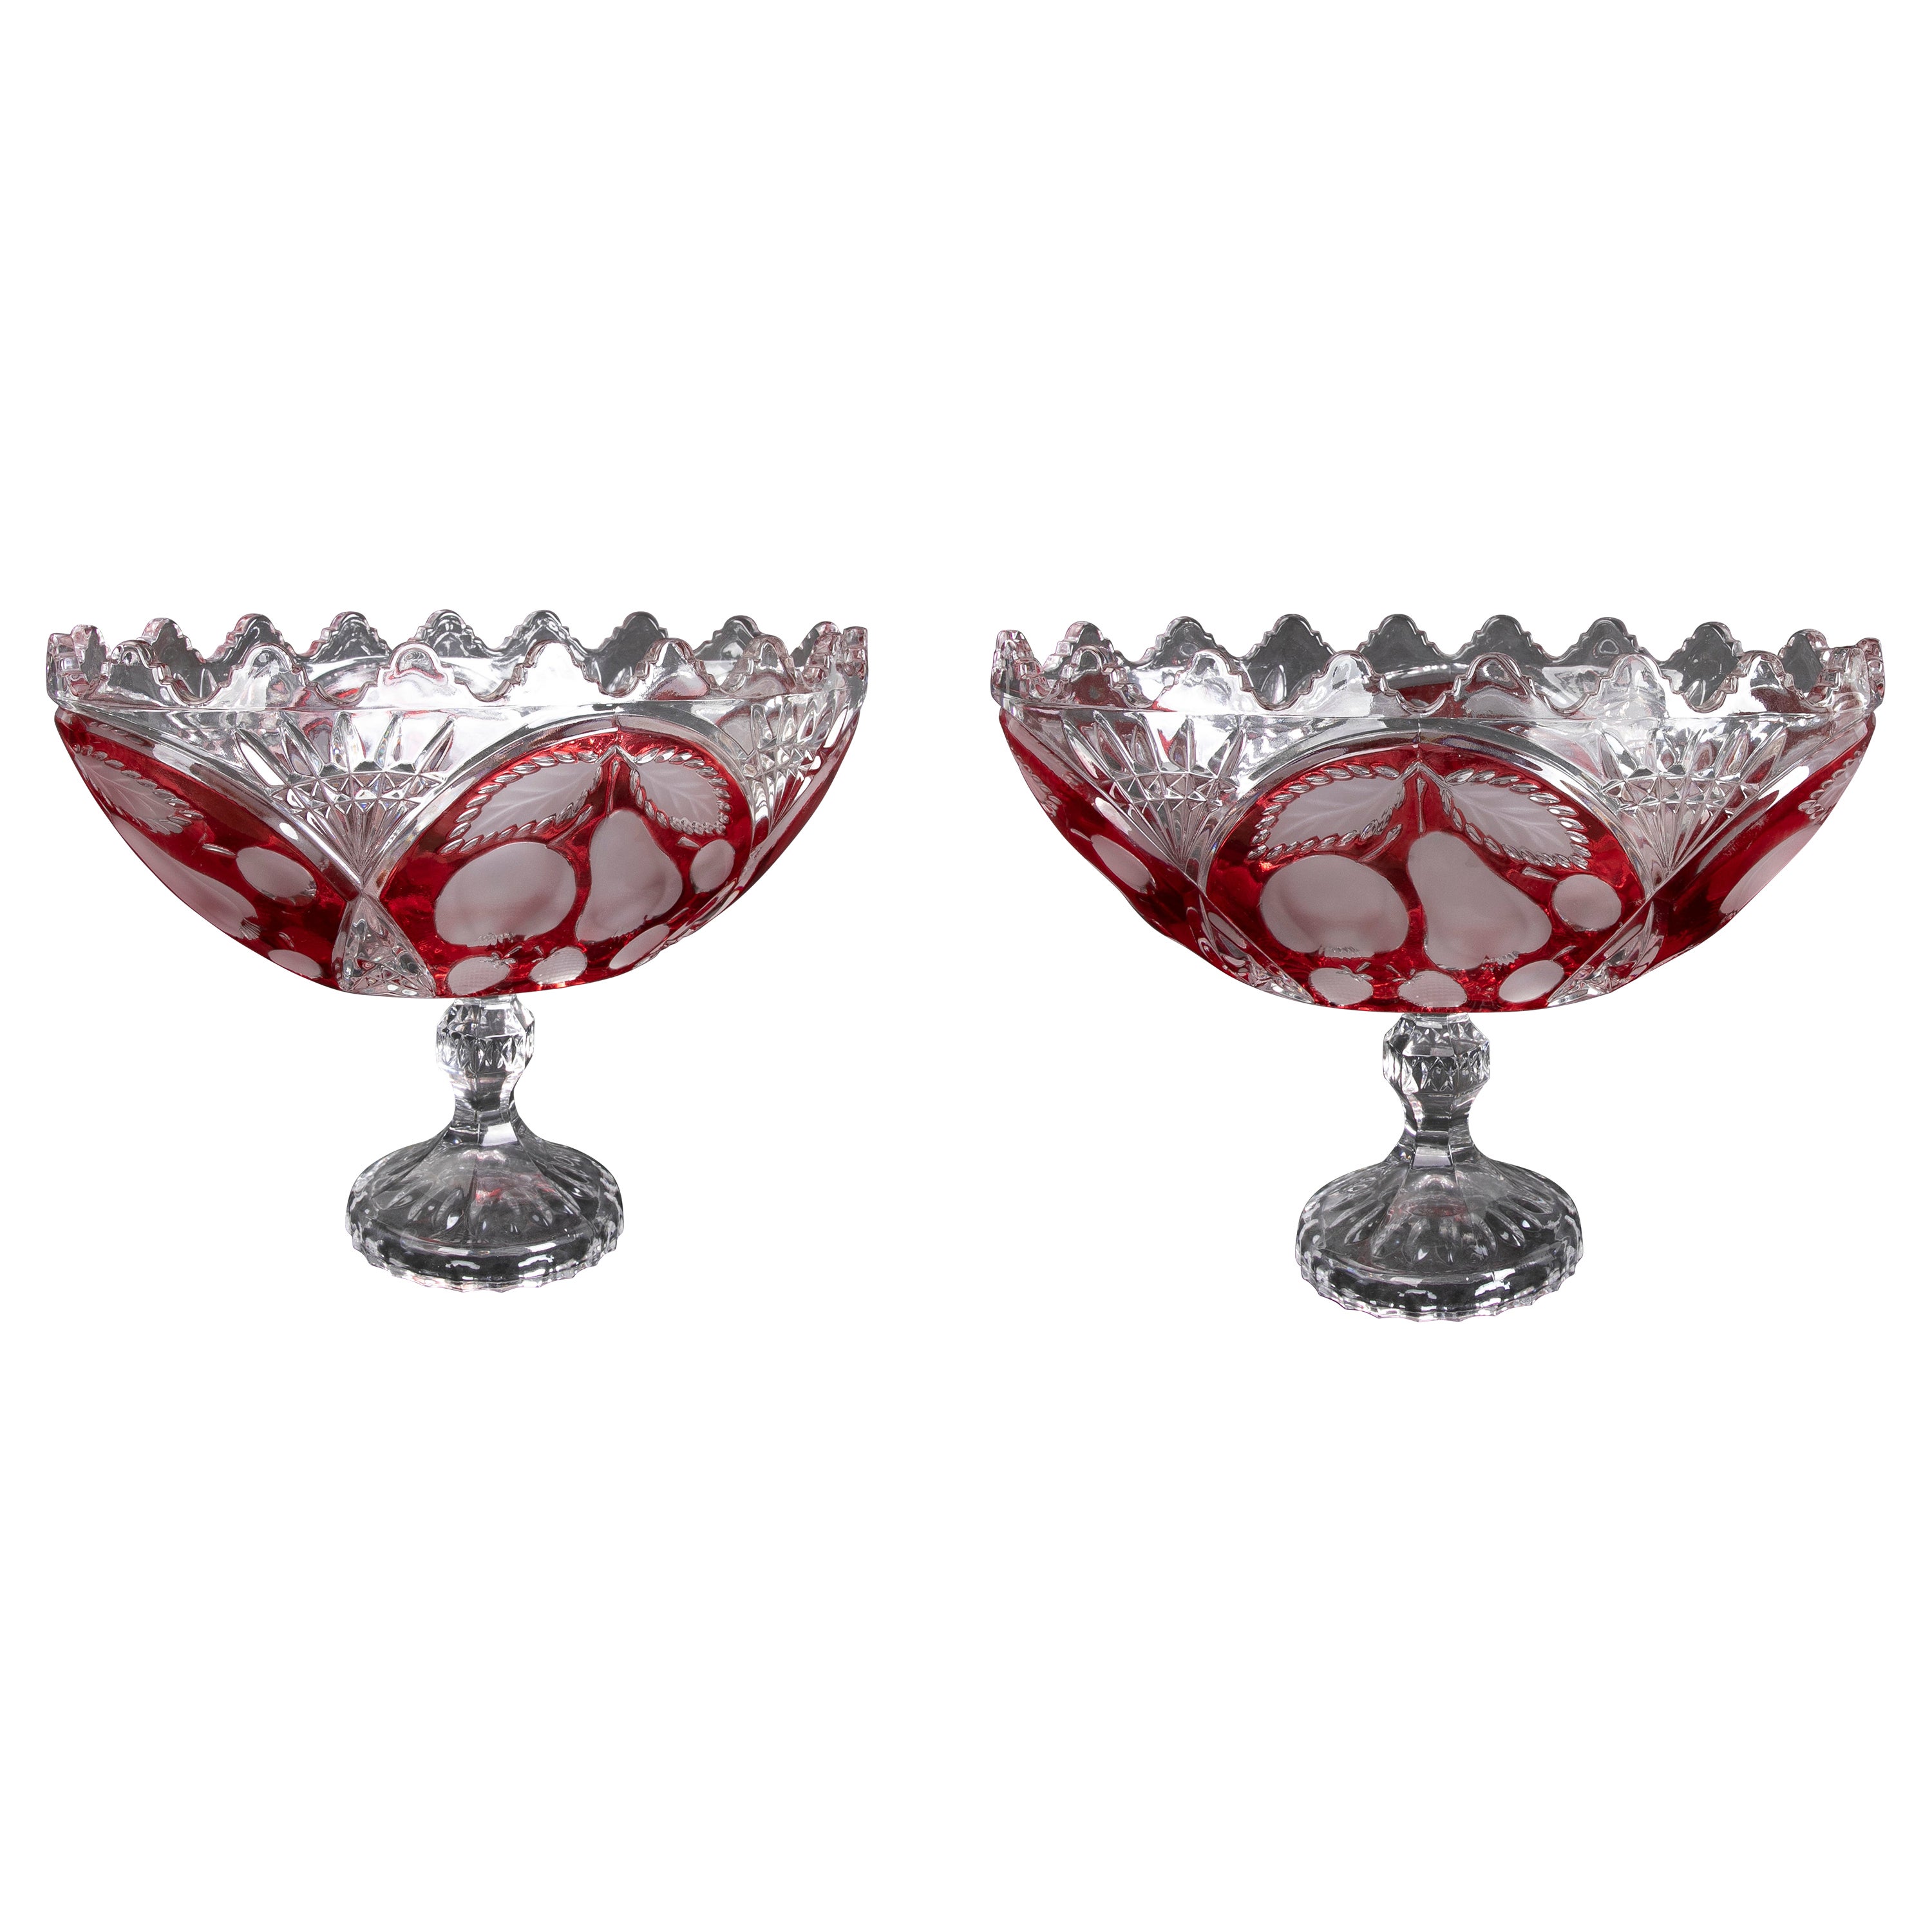 Hand-Carved Pair of Oval Crystal Vases with Red Decoration